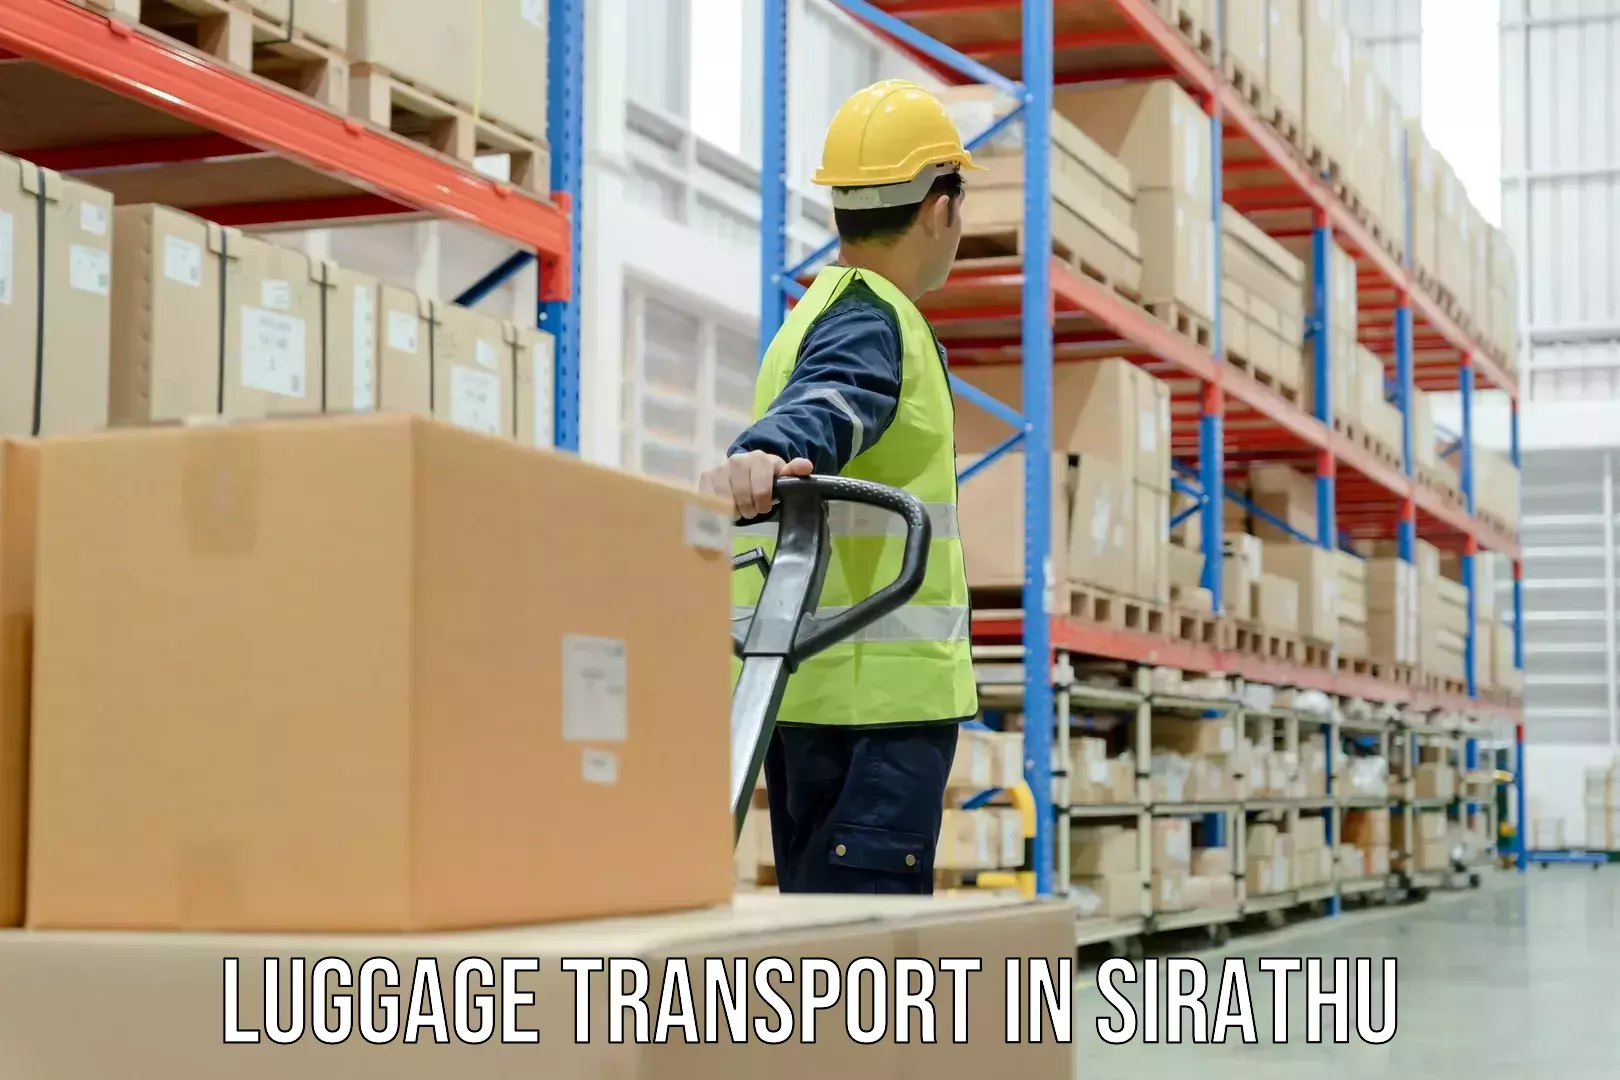 Luggage shipment specialists in Sirathu